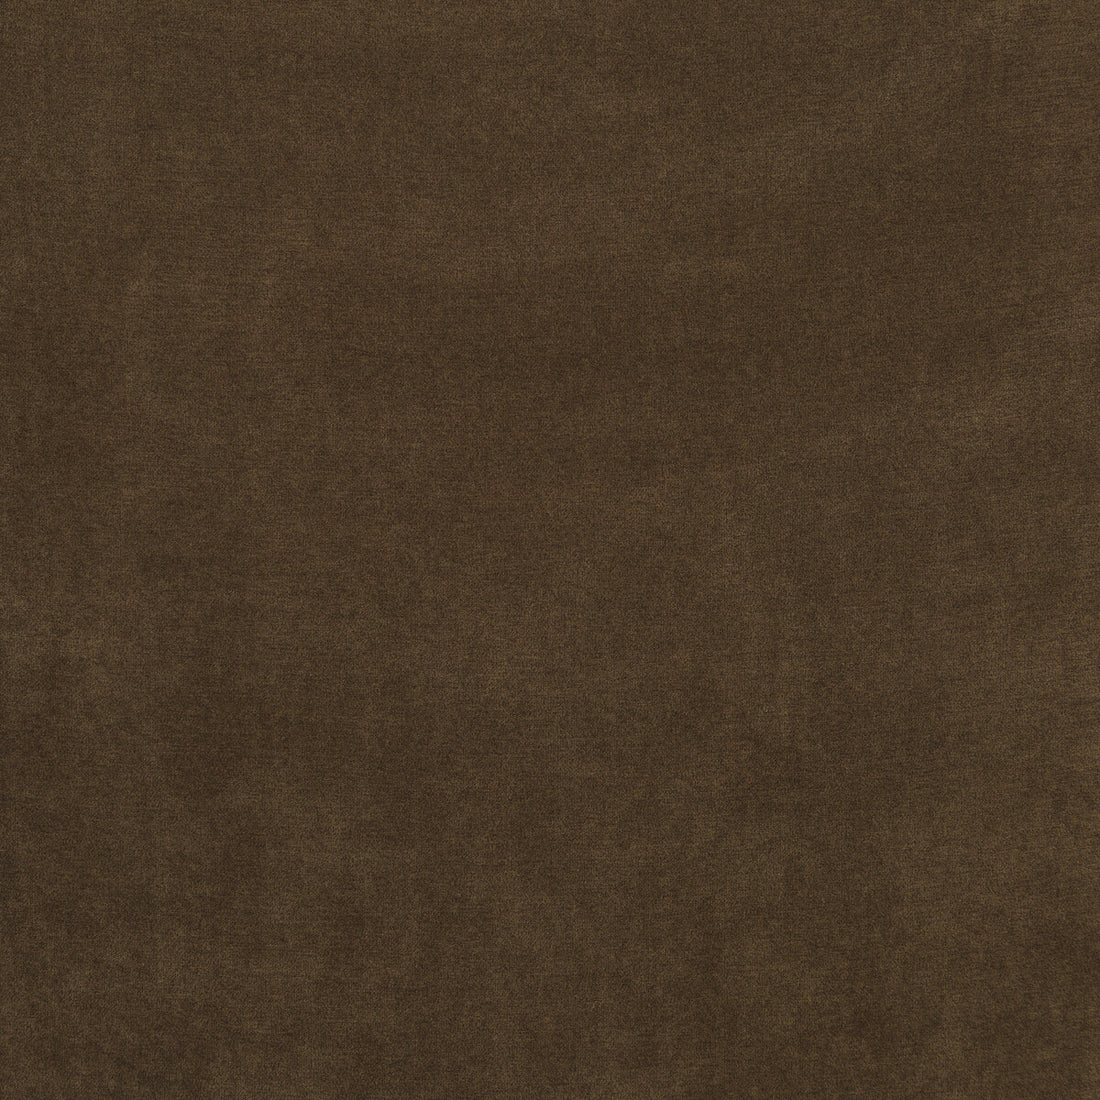 Cadogan fabric in chocolate color - pattern PF50439.290.0 - by Baker Lifestyle in the Carnival collection